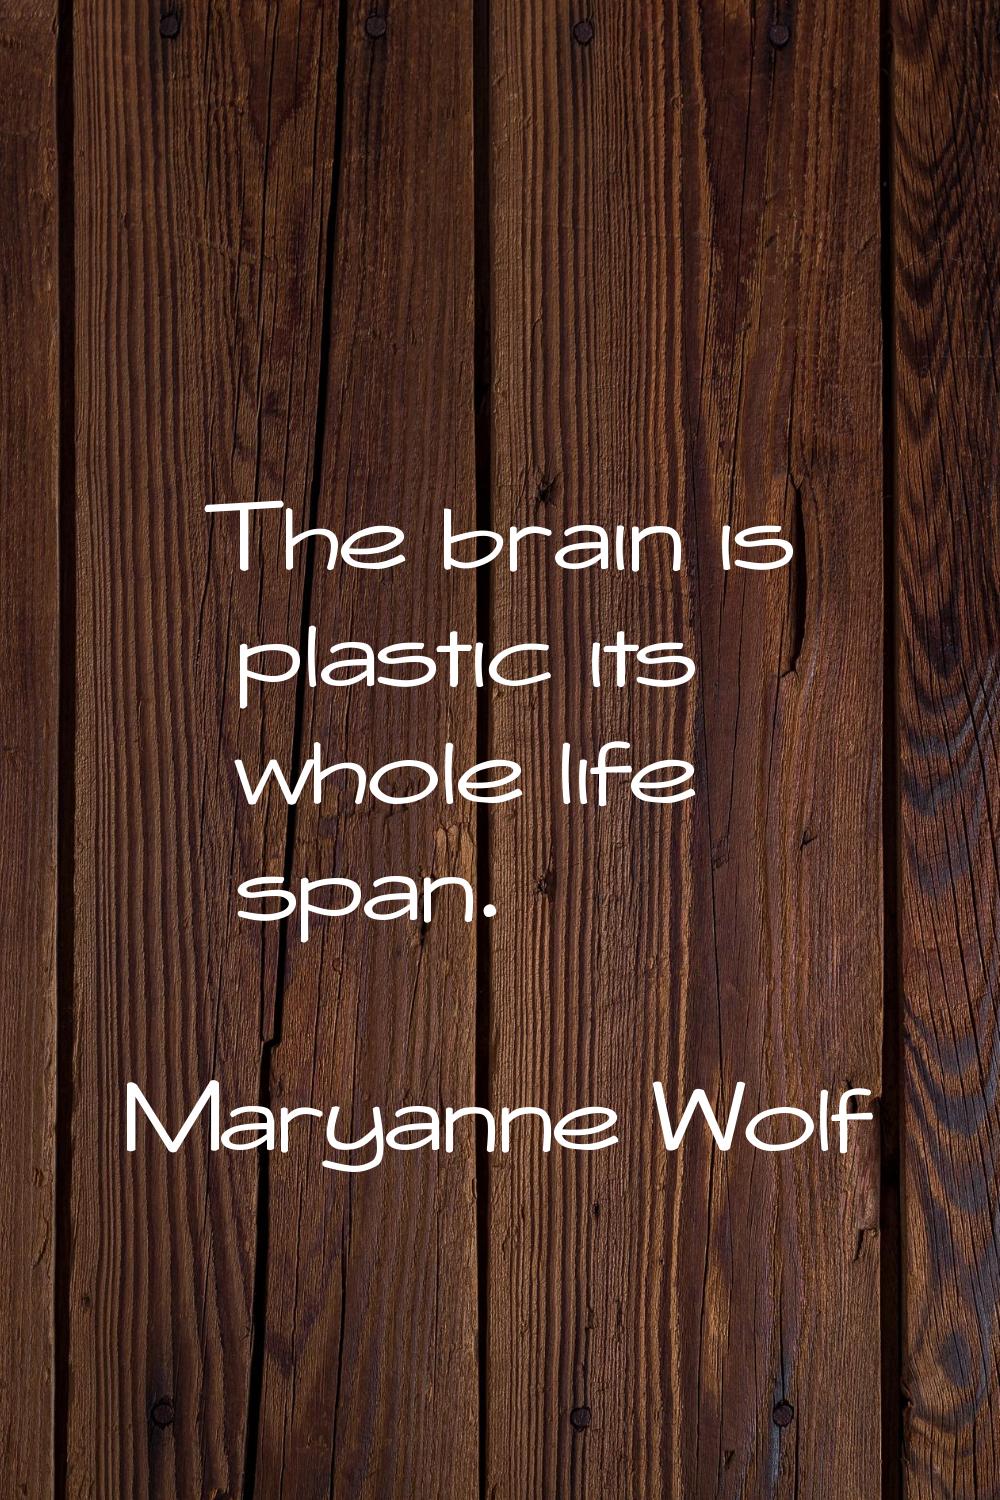 The brain is plastic its whole life span.